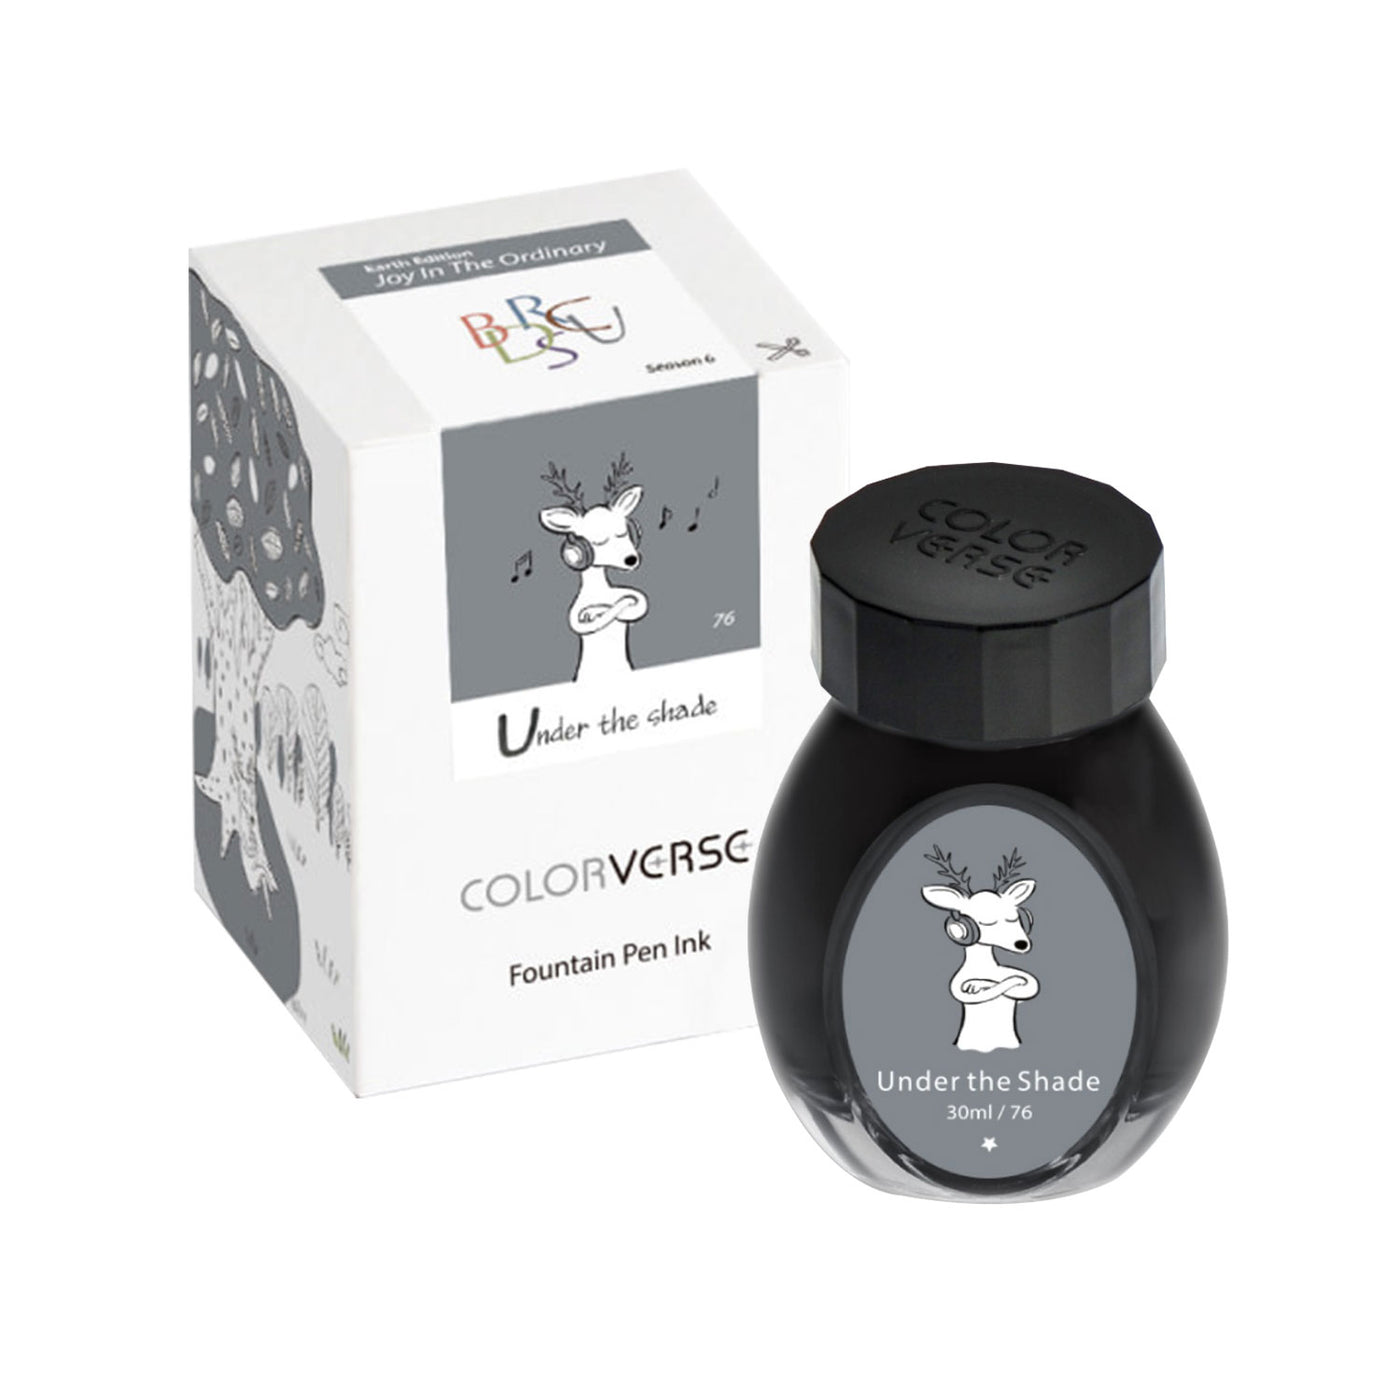 Colorverse Joy in the Ordinary Ink Bottle Under the Shade (Grey) - 30ml 3